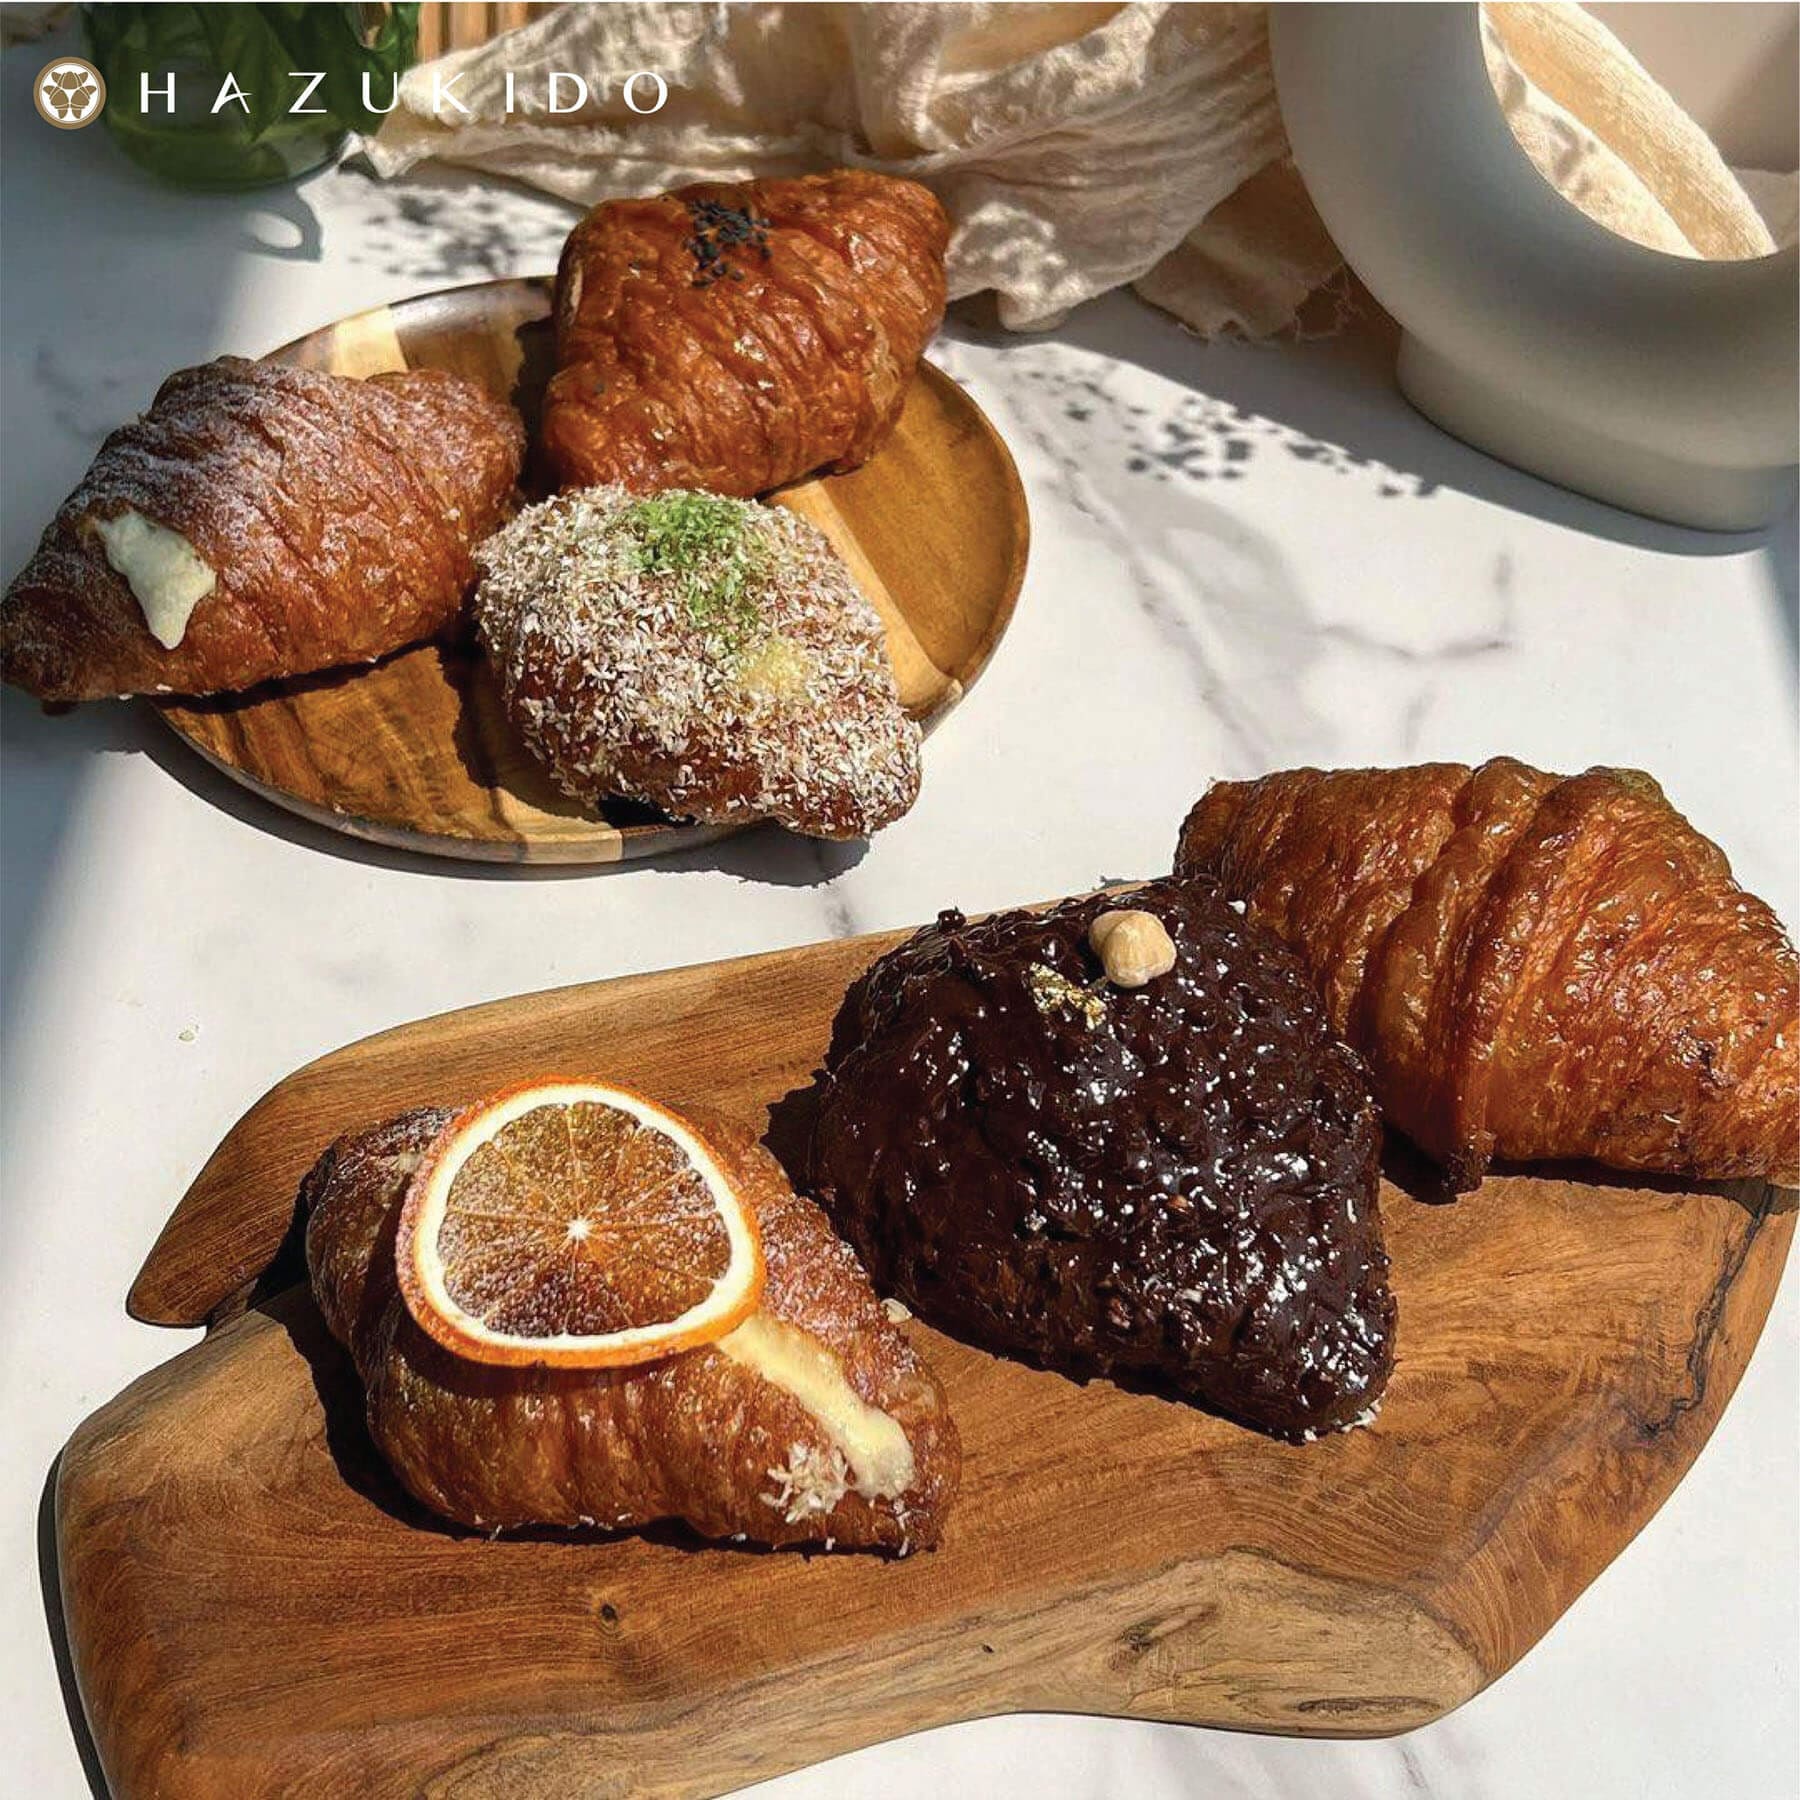 Introducing a Japanese twist to the classic French pastry, Hazukido is where cultures meet.